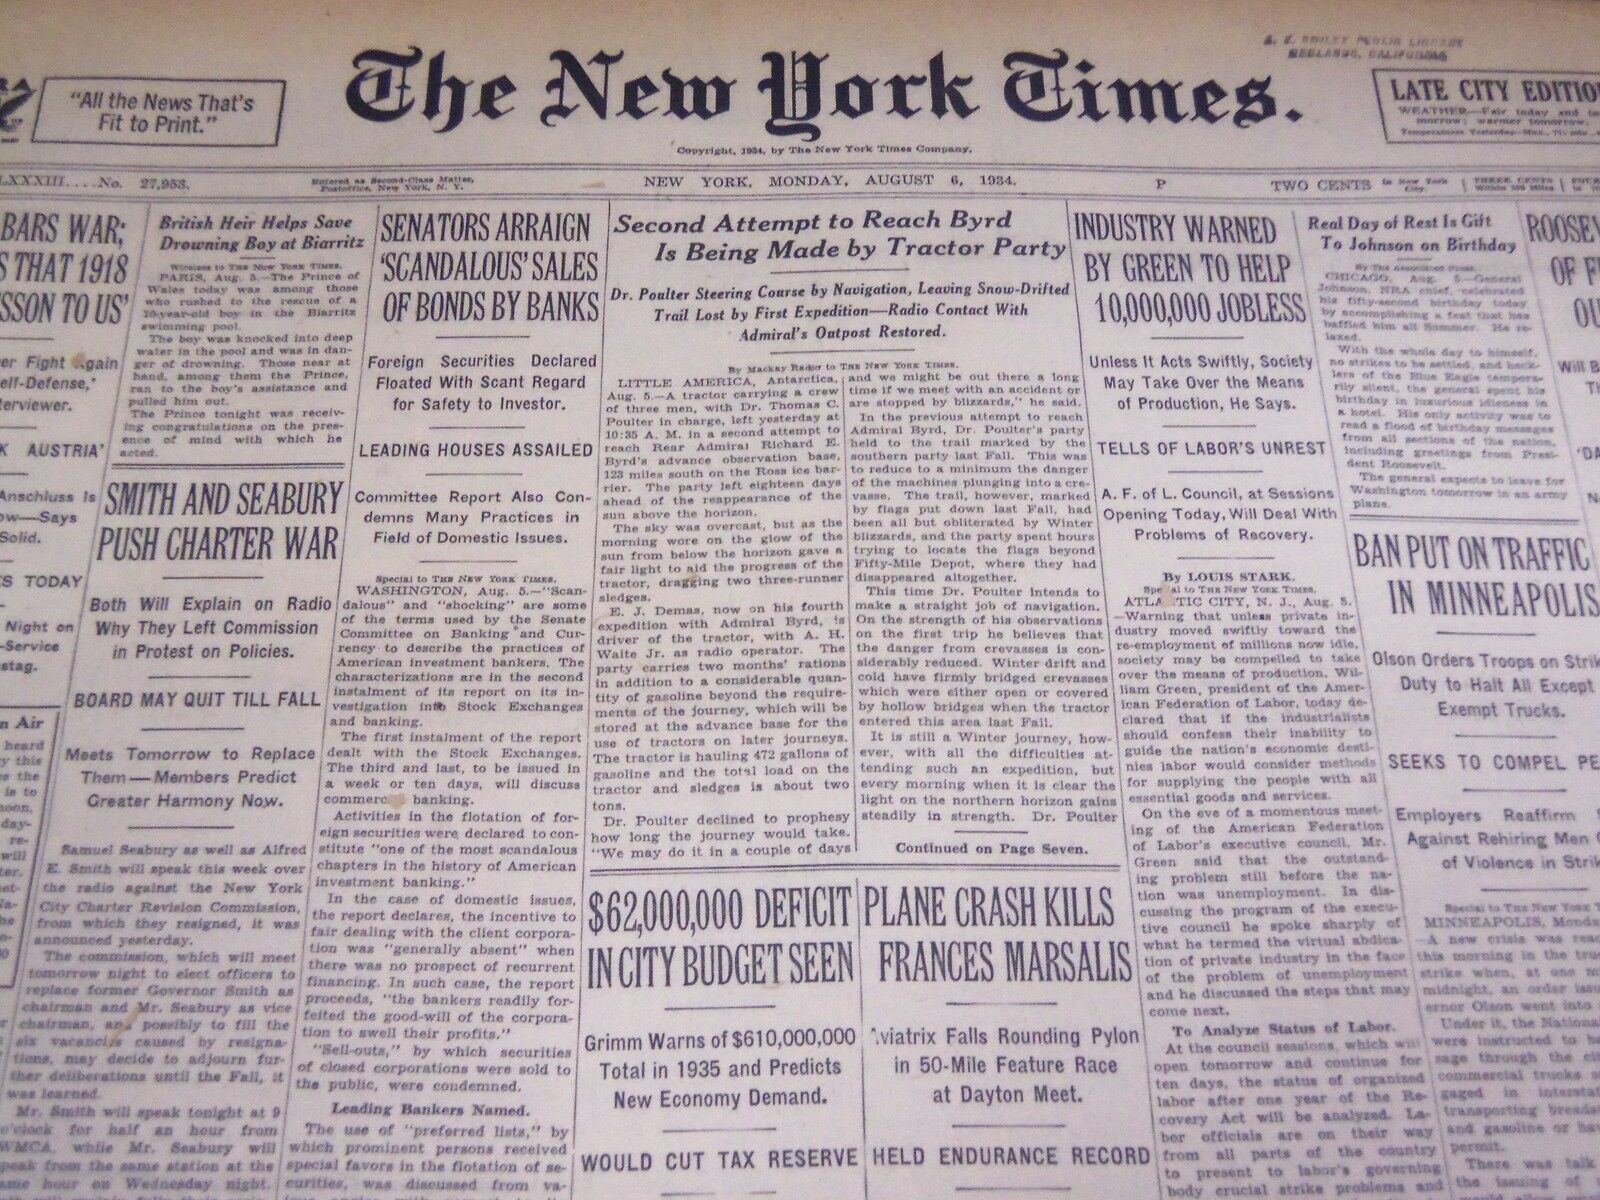 1934 AUGUST 6 NEW YORK TIMES - SECOND ATTEMPT TO REACH BYRD - NT 3987